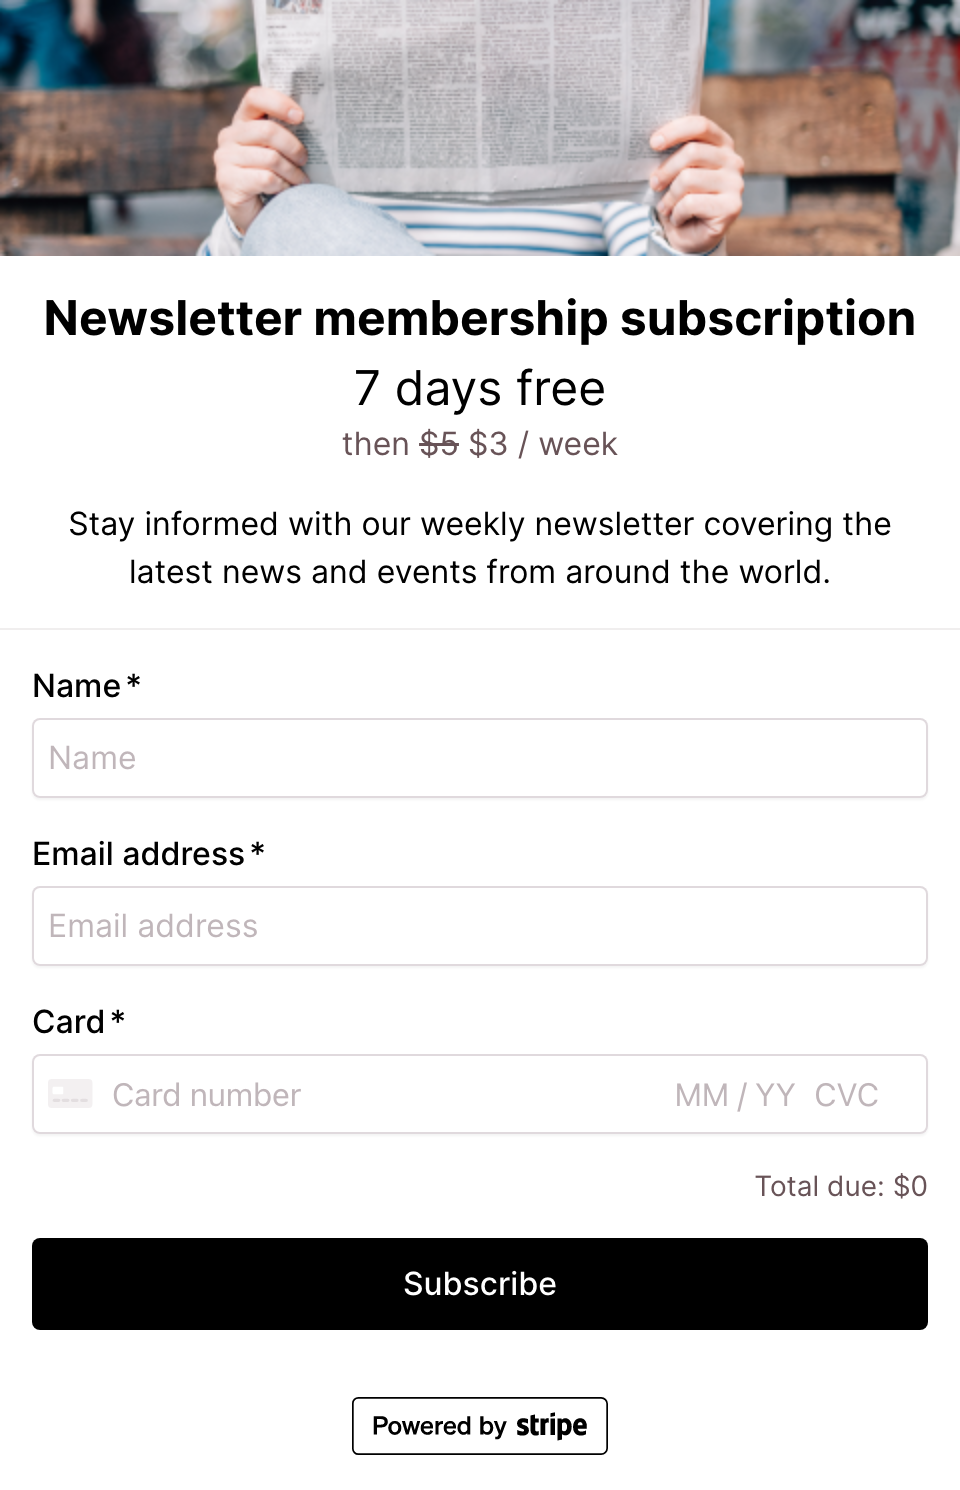 Newsletter membership checkout form